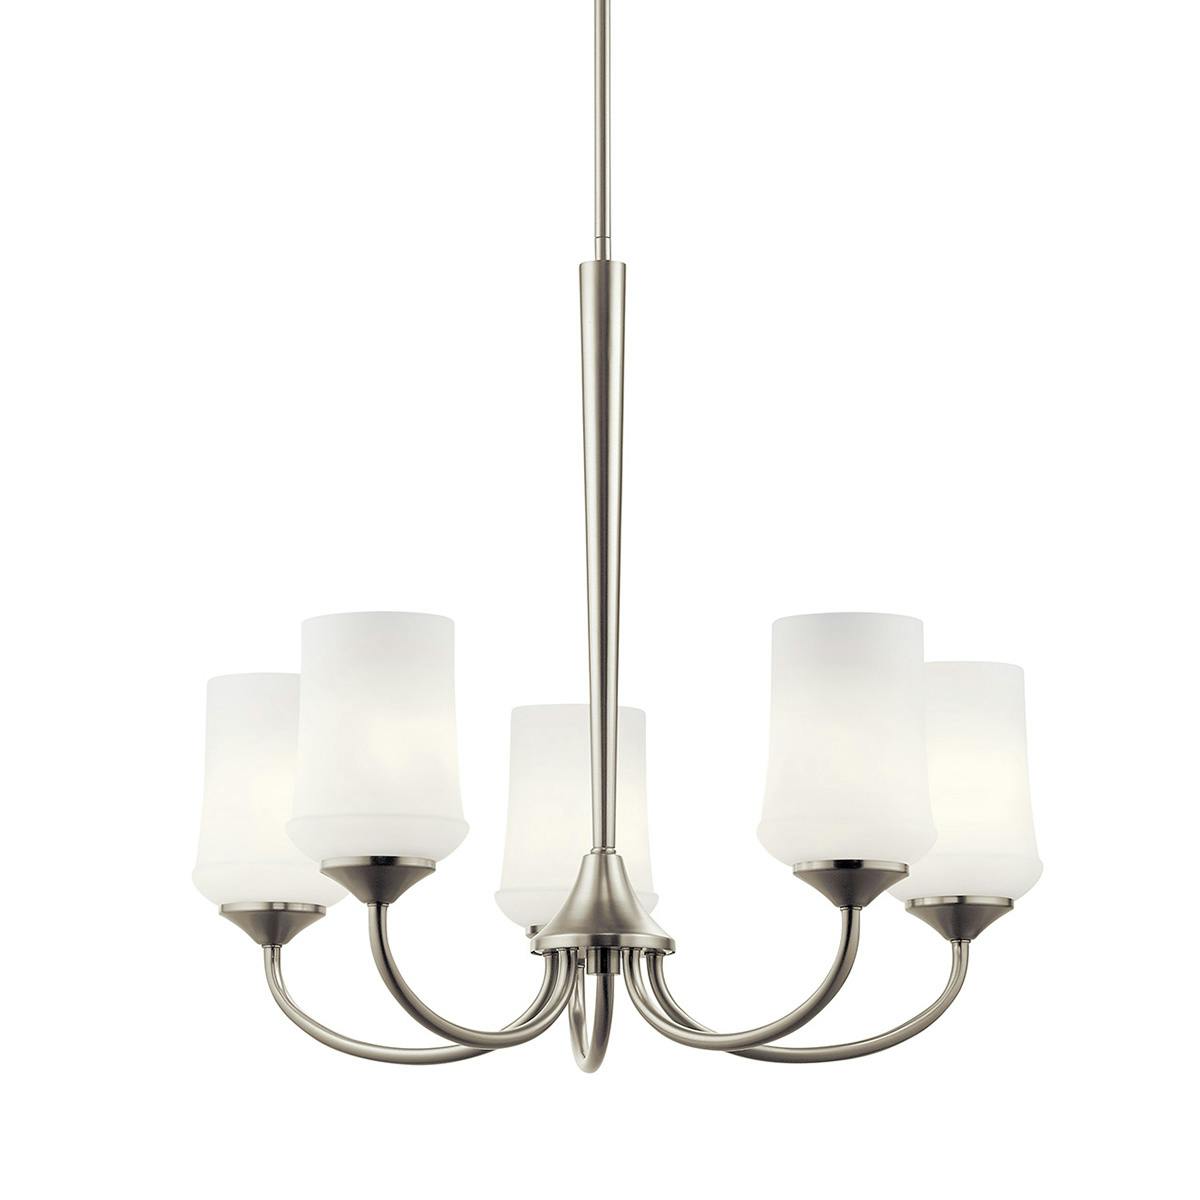 Aubrey 23" Chandelier in Brushed Nickel without the canopy on a white background